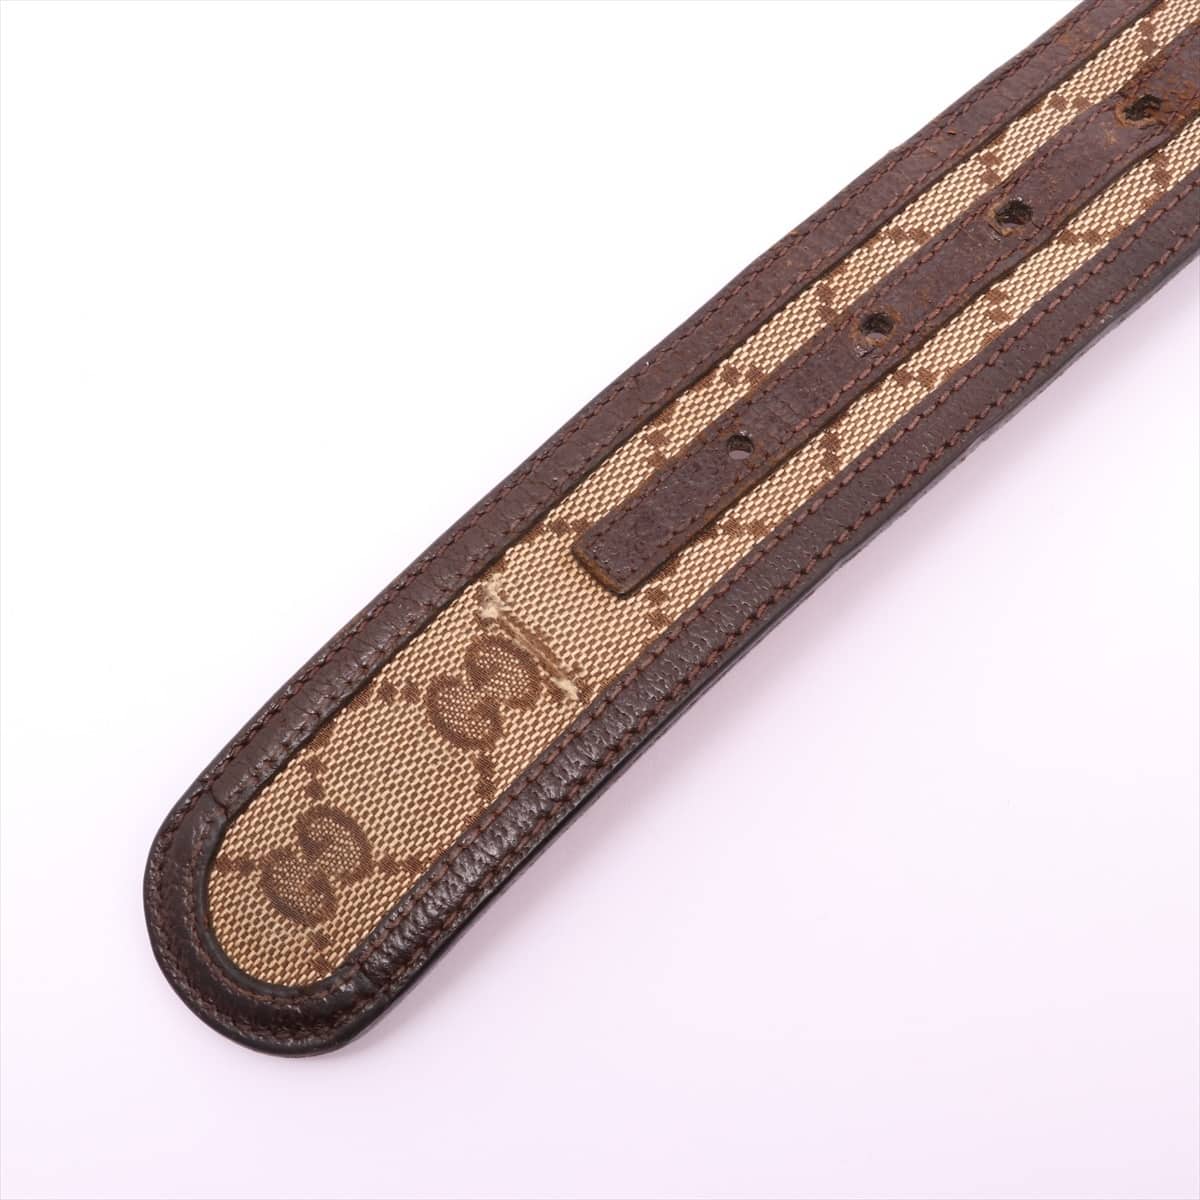 Gucci 114876 Interlocking G Belt 90/36 Canvas & leather Brown Large dirt on the back side There is a scratch on the metal fittings